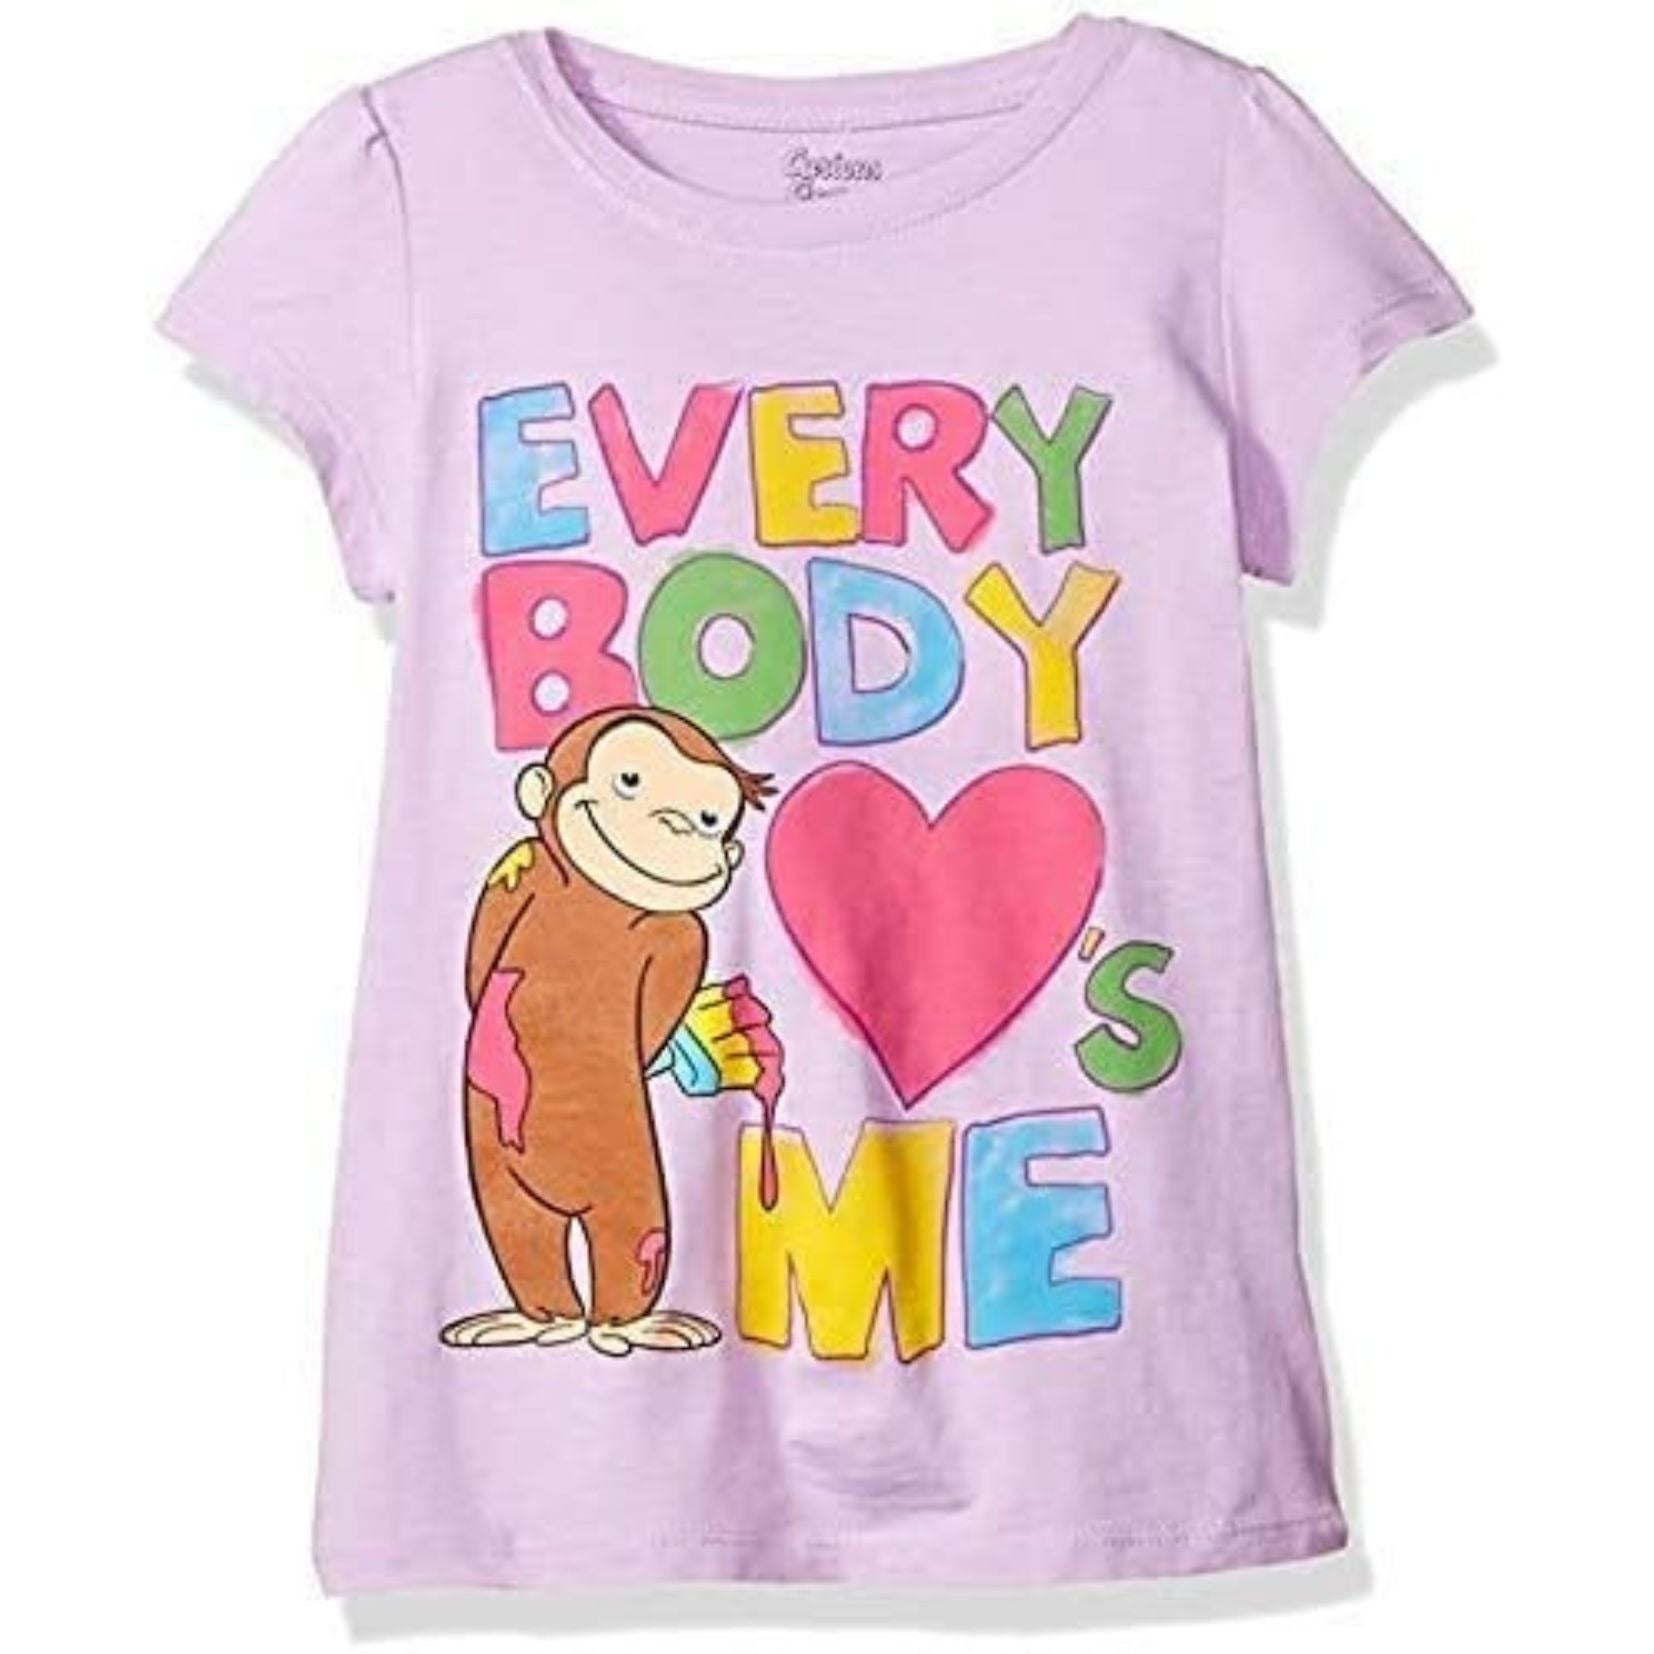 Toddler Girl Curious George T-Shirt,  Purple Size 3T, Officially Licensed Top